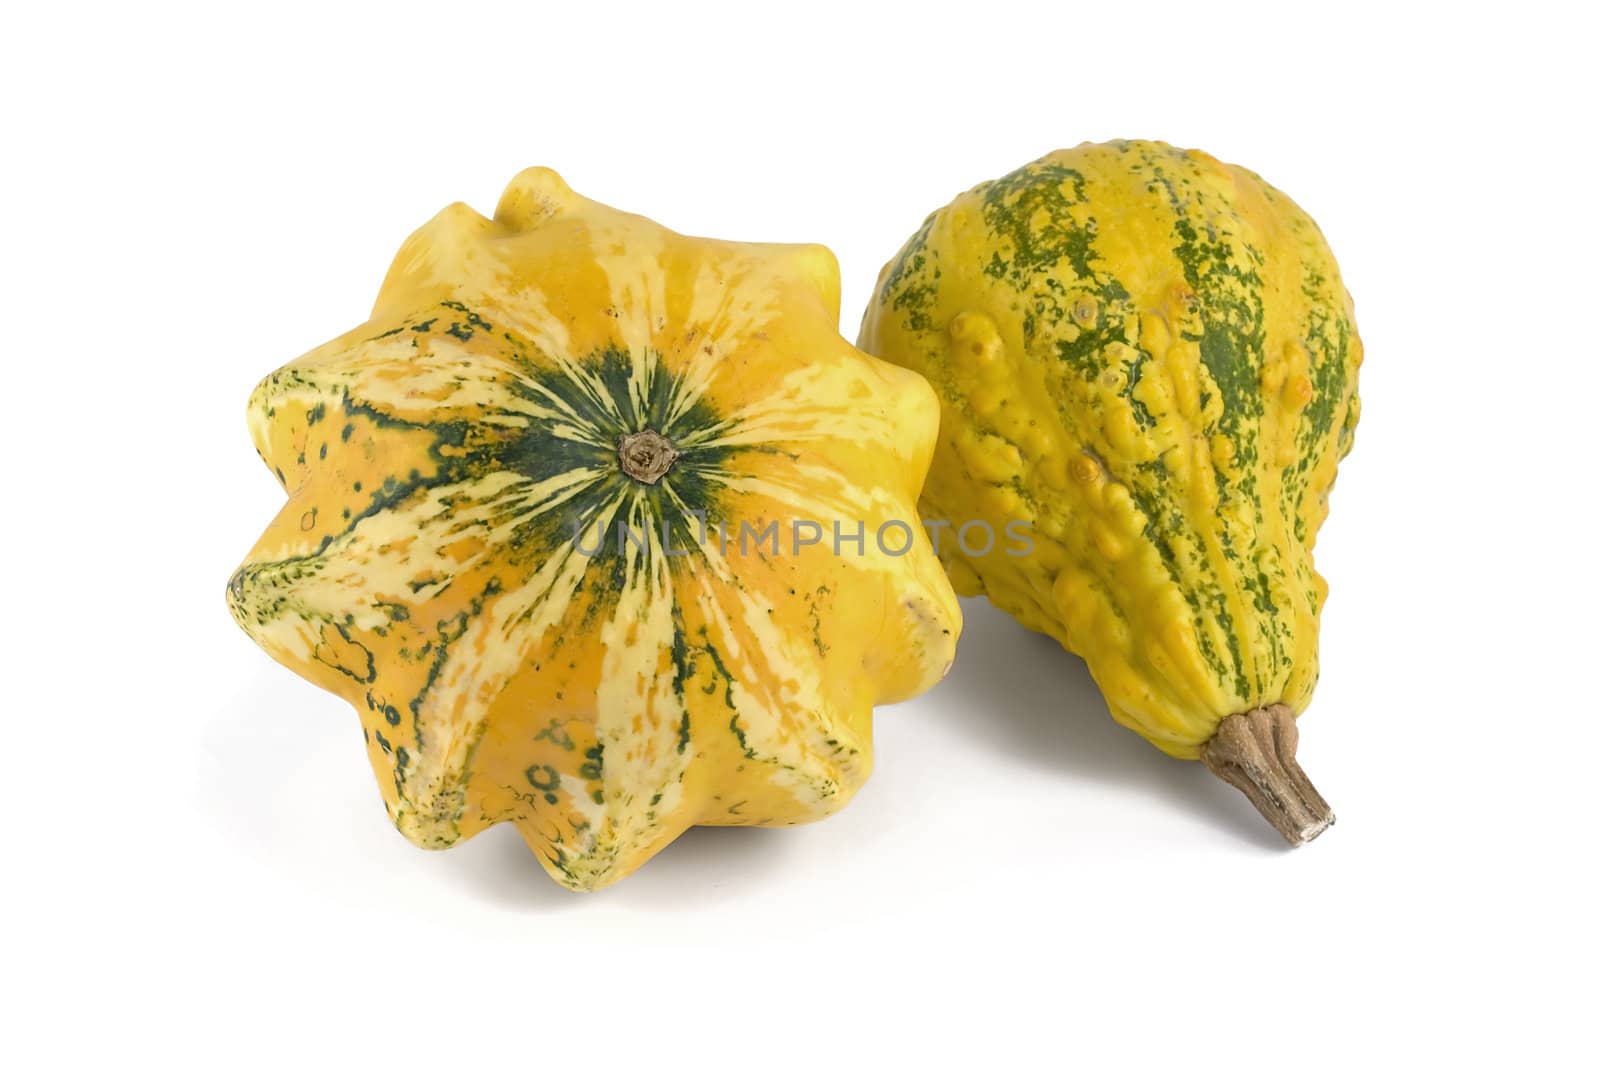 Two yellow ornamental pumpkins over white background.